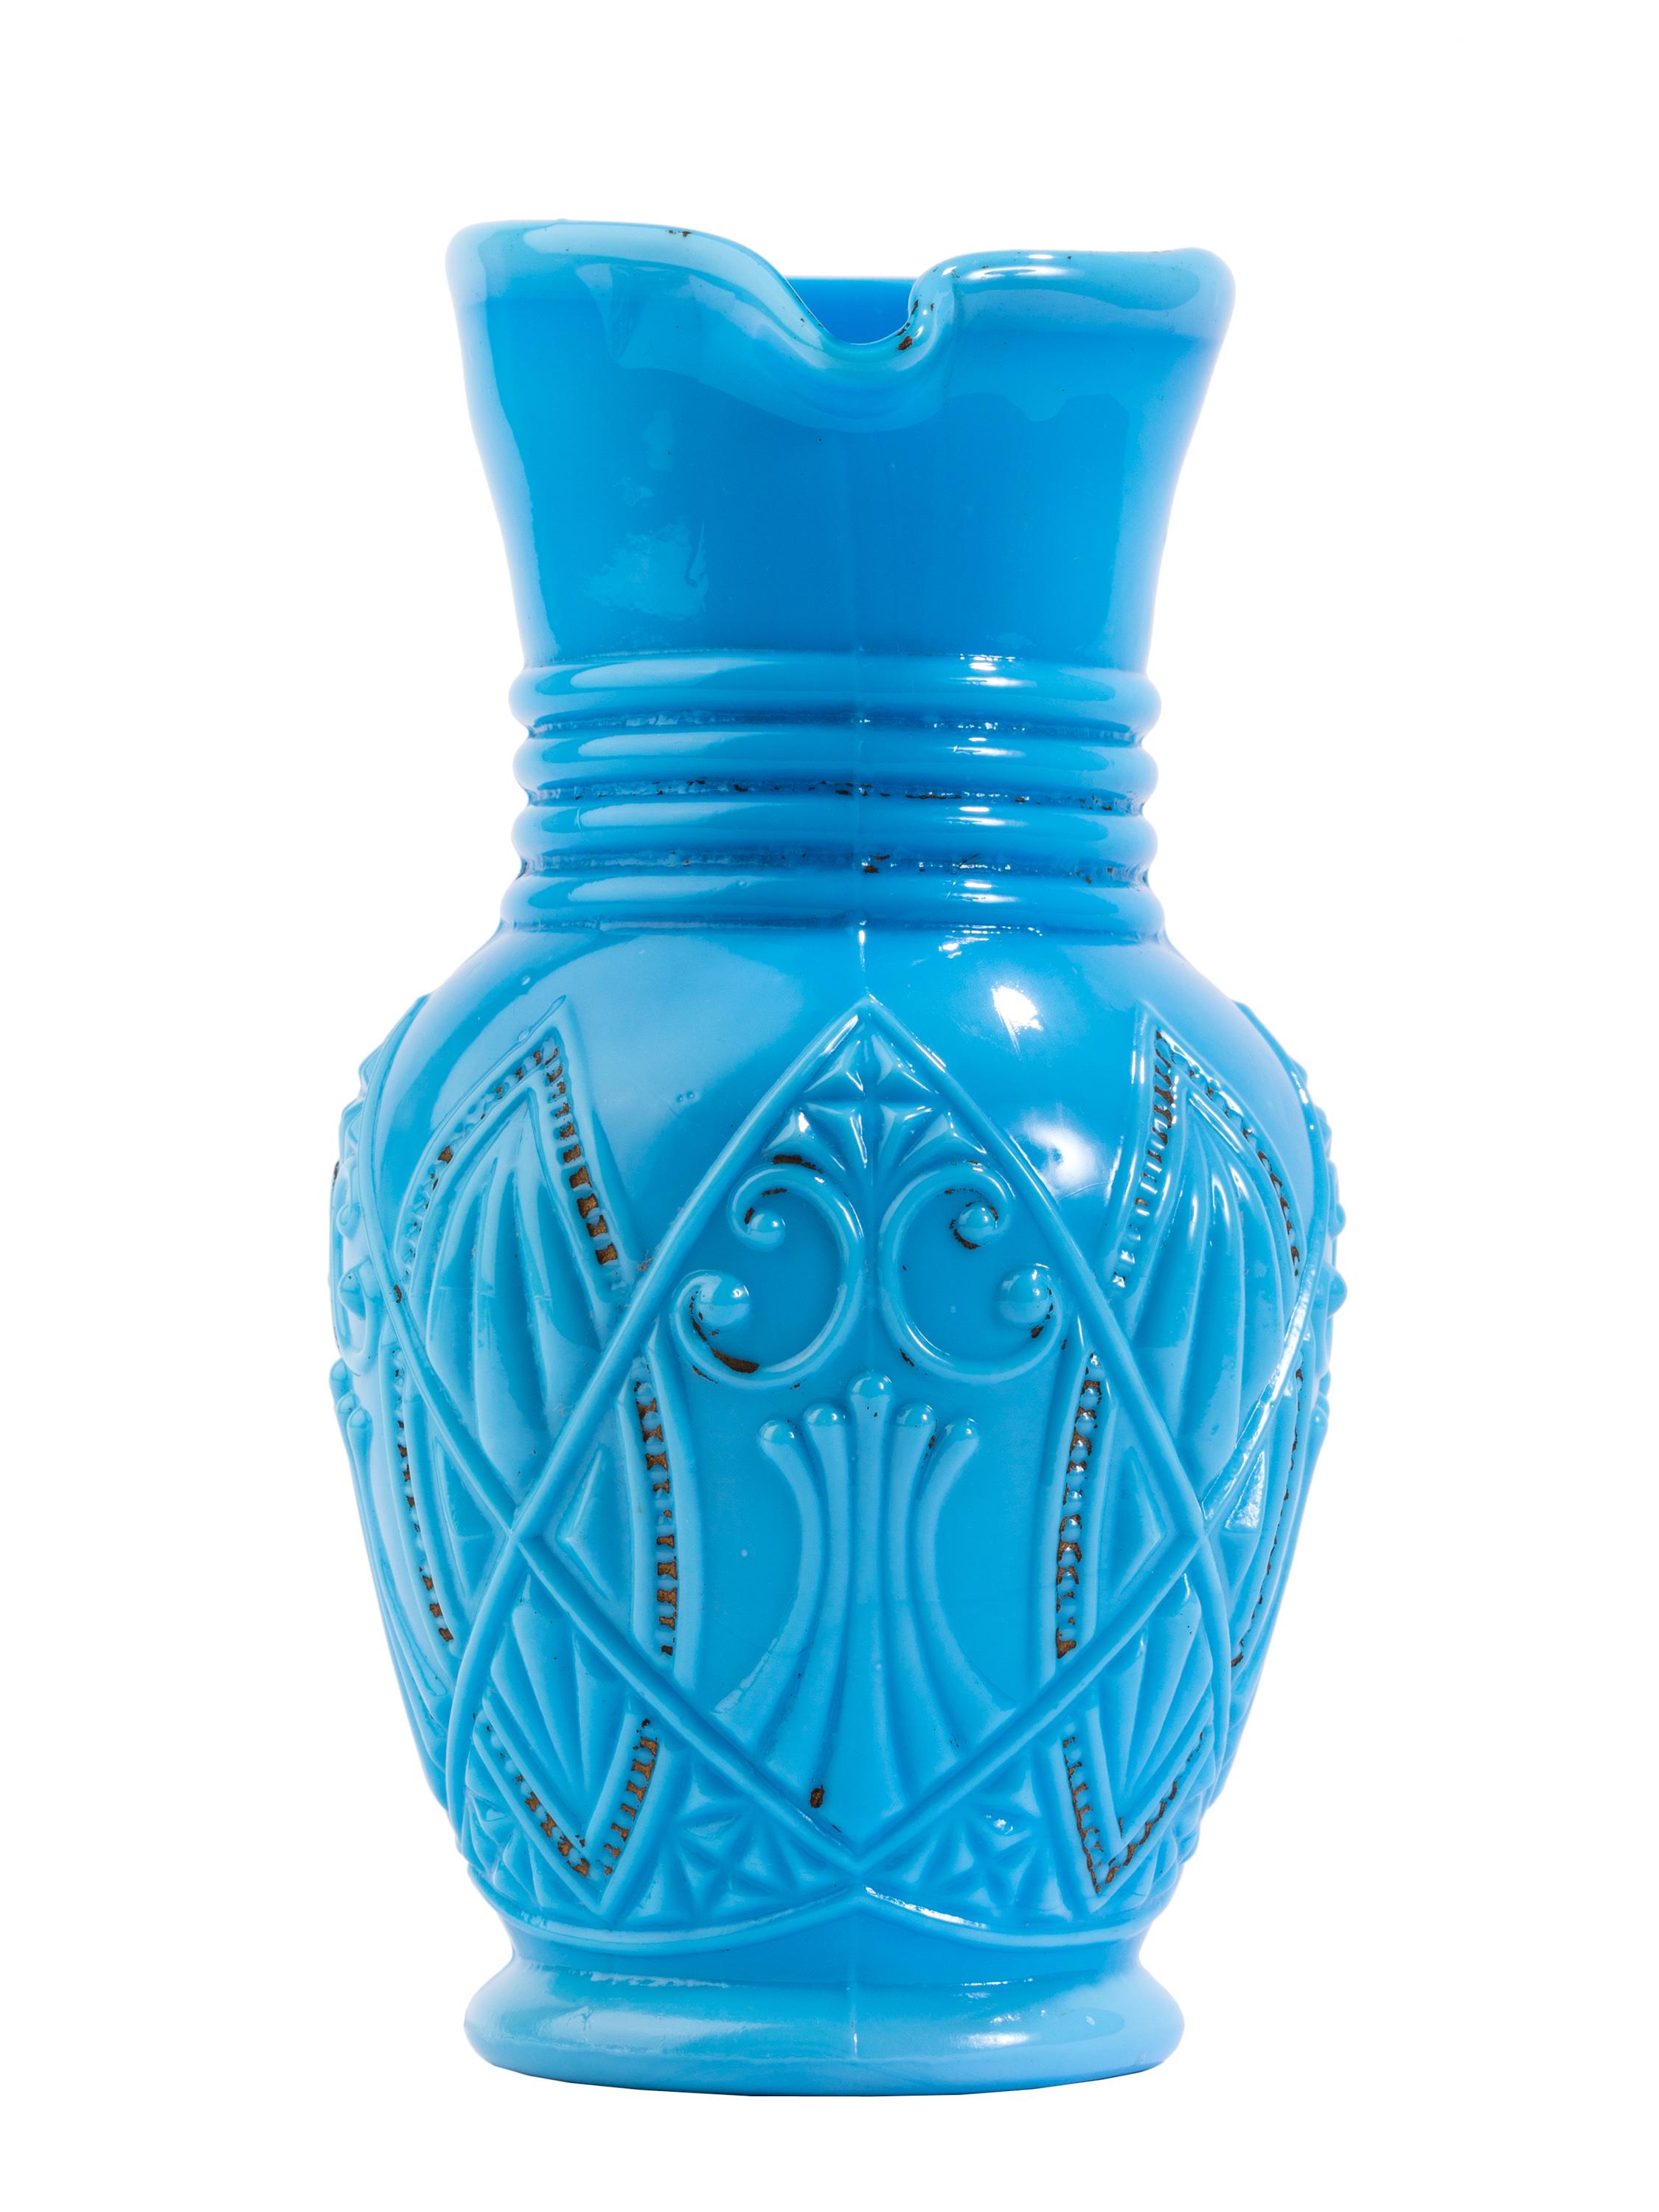 Probably produced by French glassmaker Portieux Vallerysthal in the early 20th century. Though not true hand blown French opaline glass, P/V called its many series of milk glass style opaque turquoise-blue pieces 